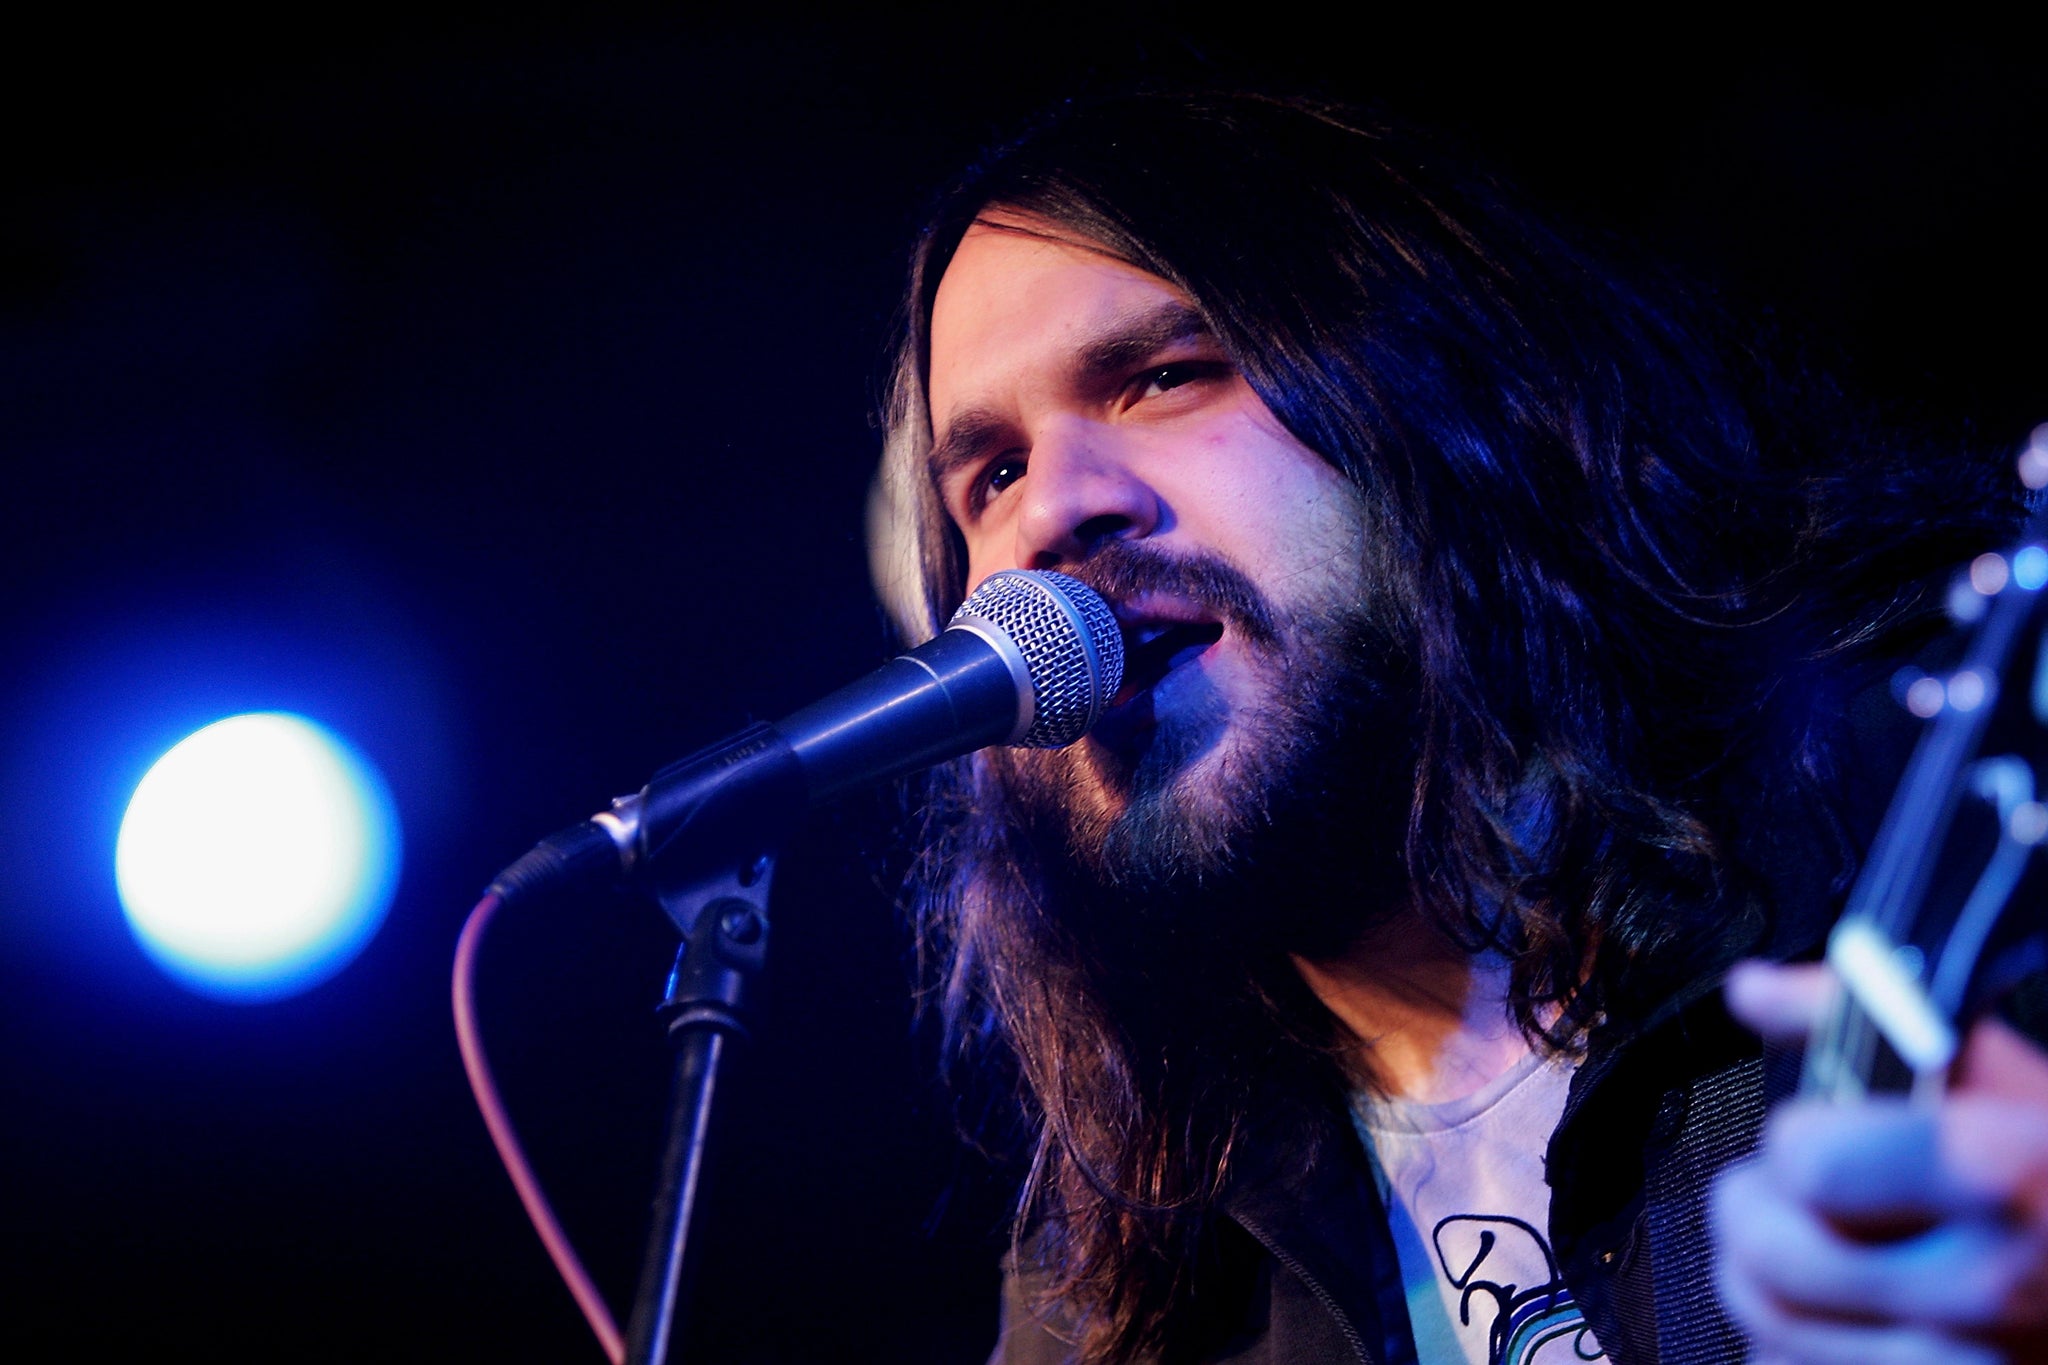 Romeo of The Magic Numbers performs on stage